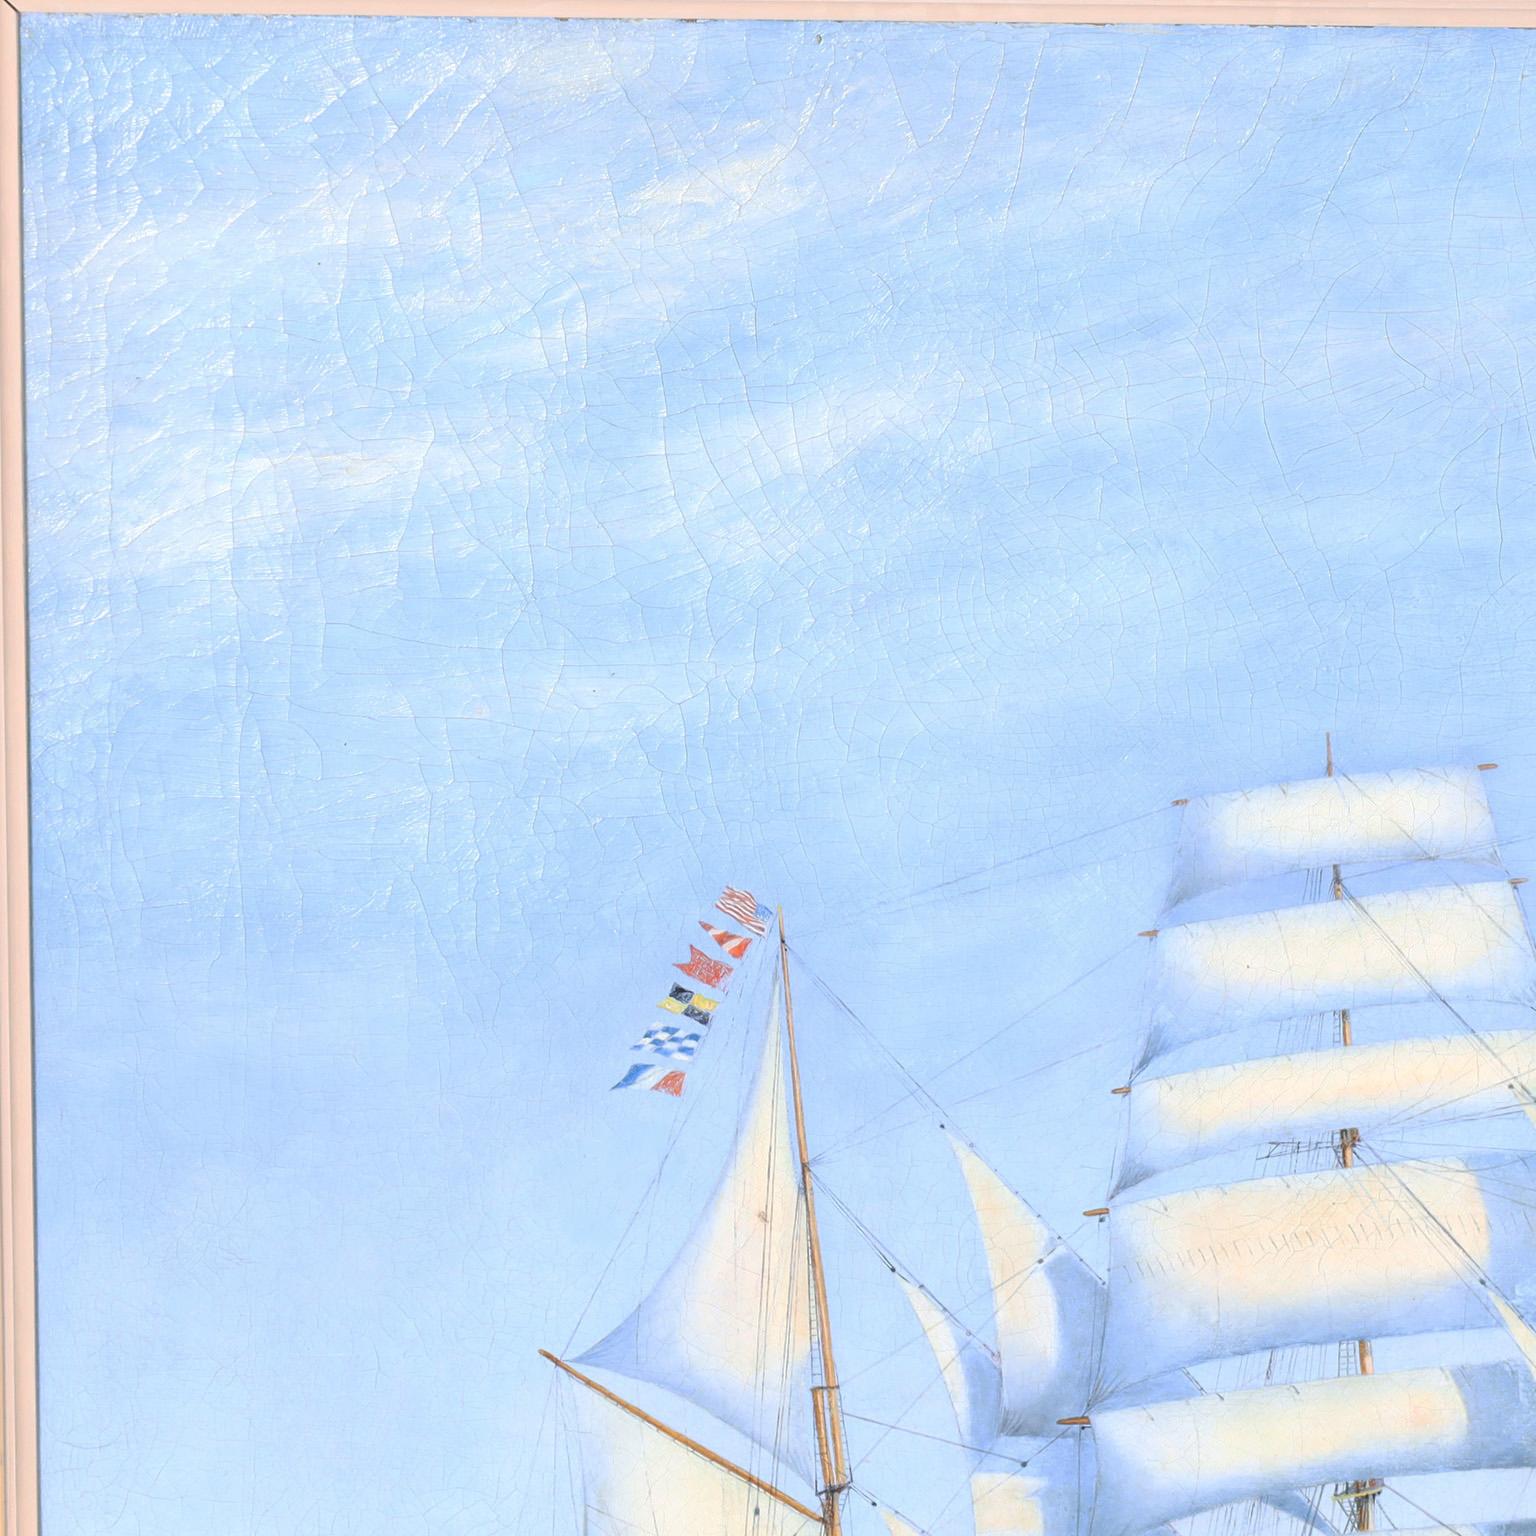 Striking oil painting on canvas of an American four mast sailing ship, in all its glory, in ocean waters with a stem ship in the horizon. Signed by noted marine artist Frederick L.Owen, titled 